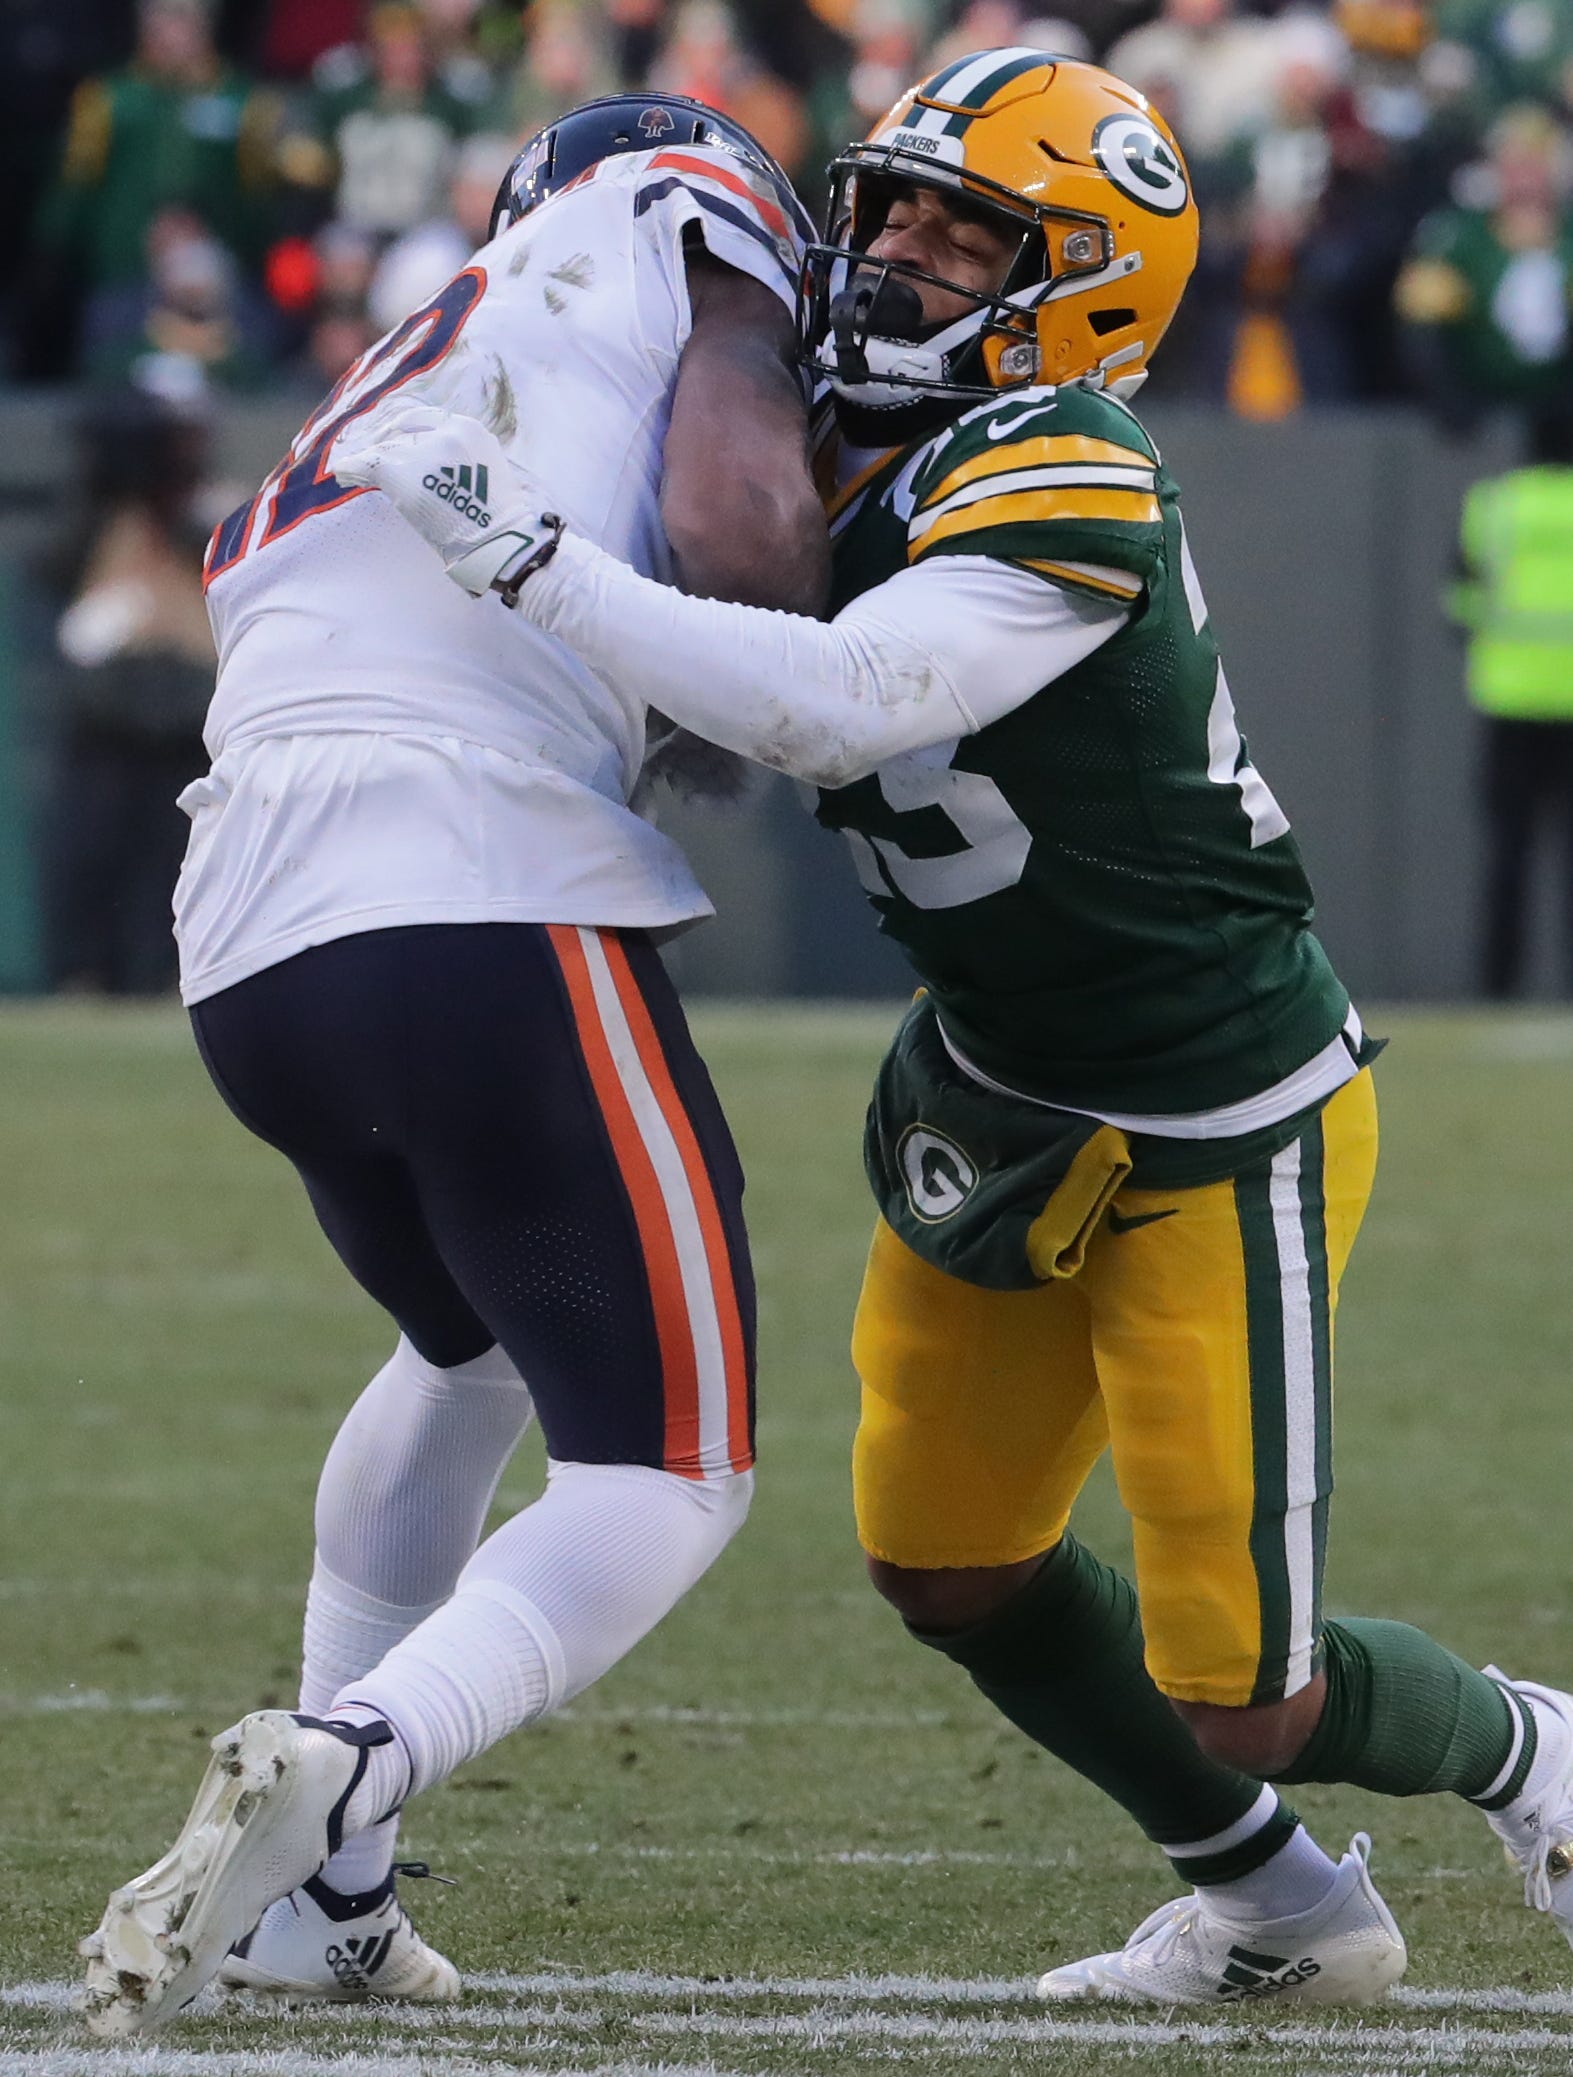 Green Bay Packers cornerback Jaire Alexander (23) stops Chicago Bears wide receiver Allen Robinson (12) in his tracks during the fourth quarter of their game Sunday, December 15, 2019 at Lambeau Field in Green Bay, Wis. The Green Bay Packers beat the Chicago Bears 21-13.